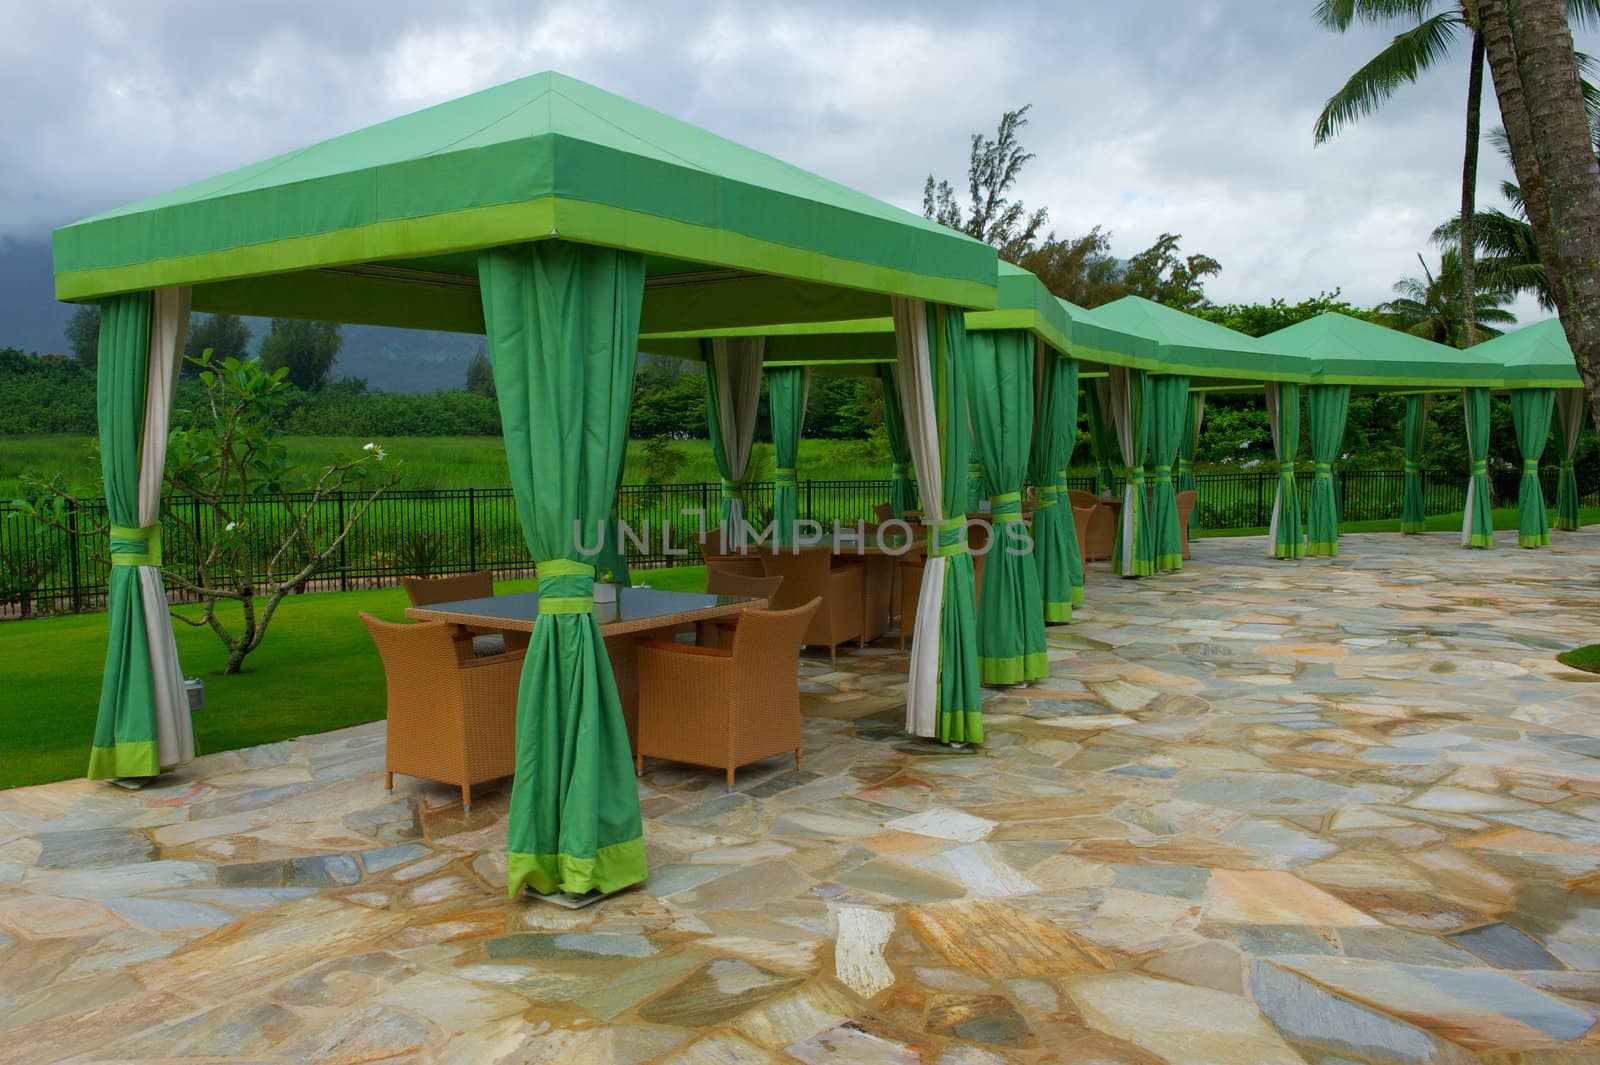 Verdant green shade structures or cabanas with tables and chairs at a resort in Hawaii